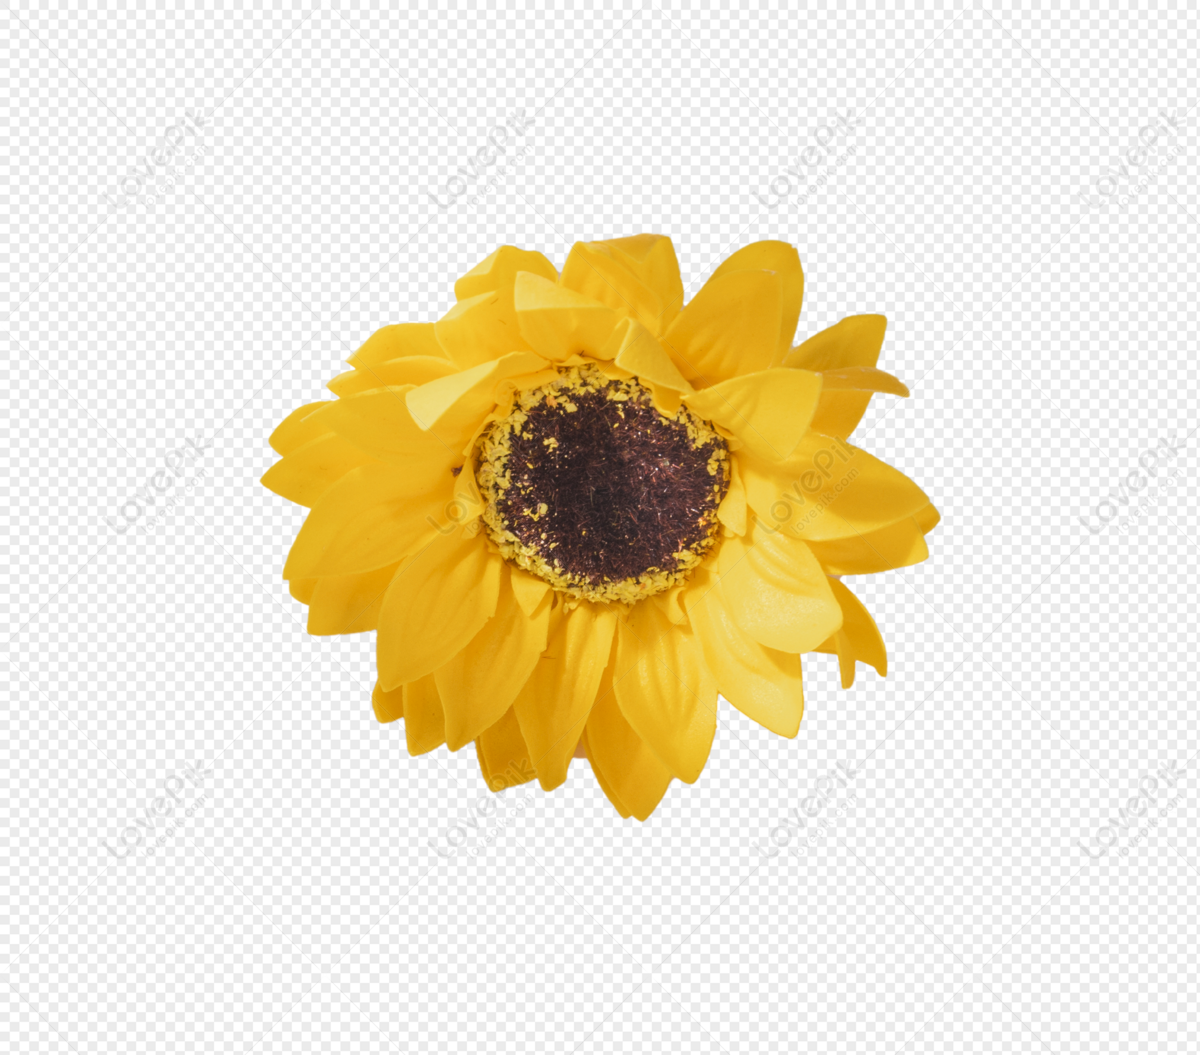 Sunflower Flower PNG Picture And Clipart Image For Free Download - Lovepik  | 401432115